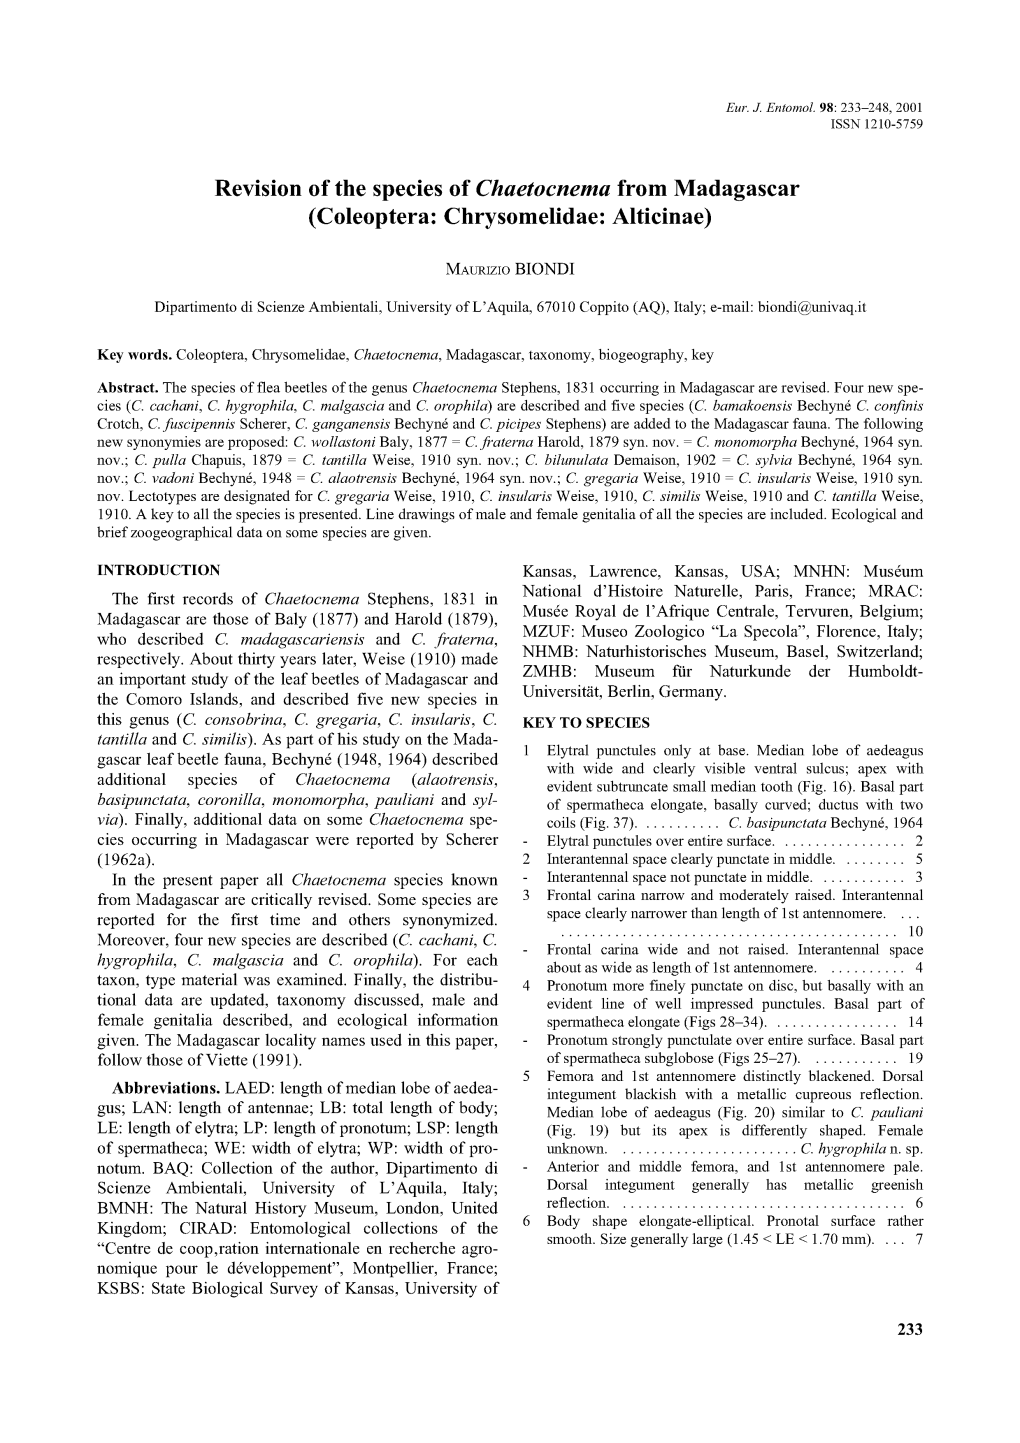 Revision of the Species of Chaetocnema from Madagascar